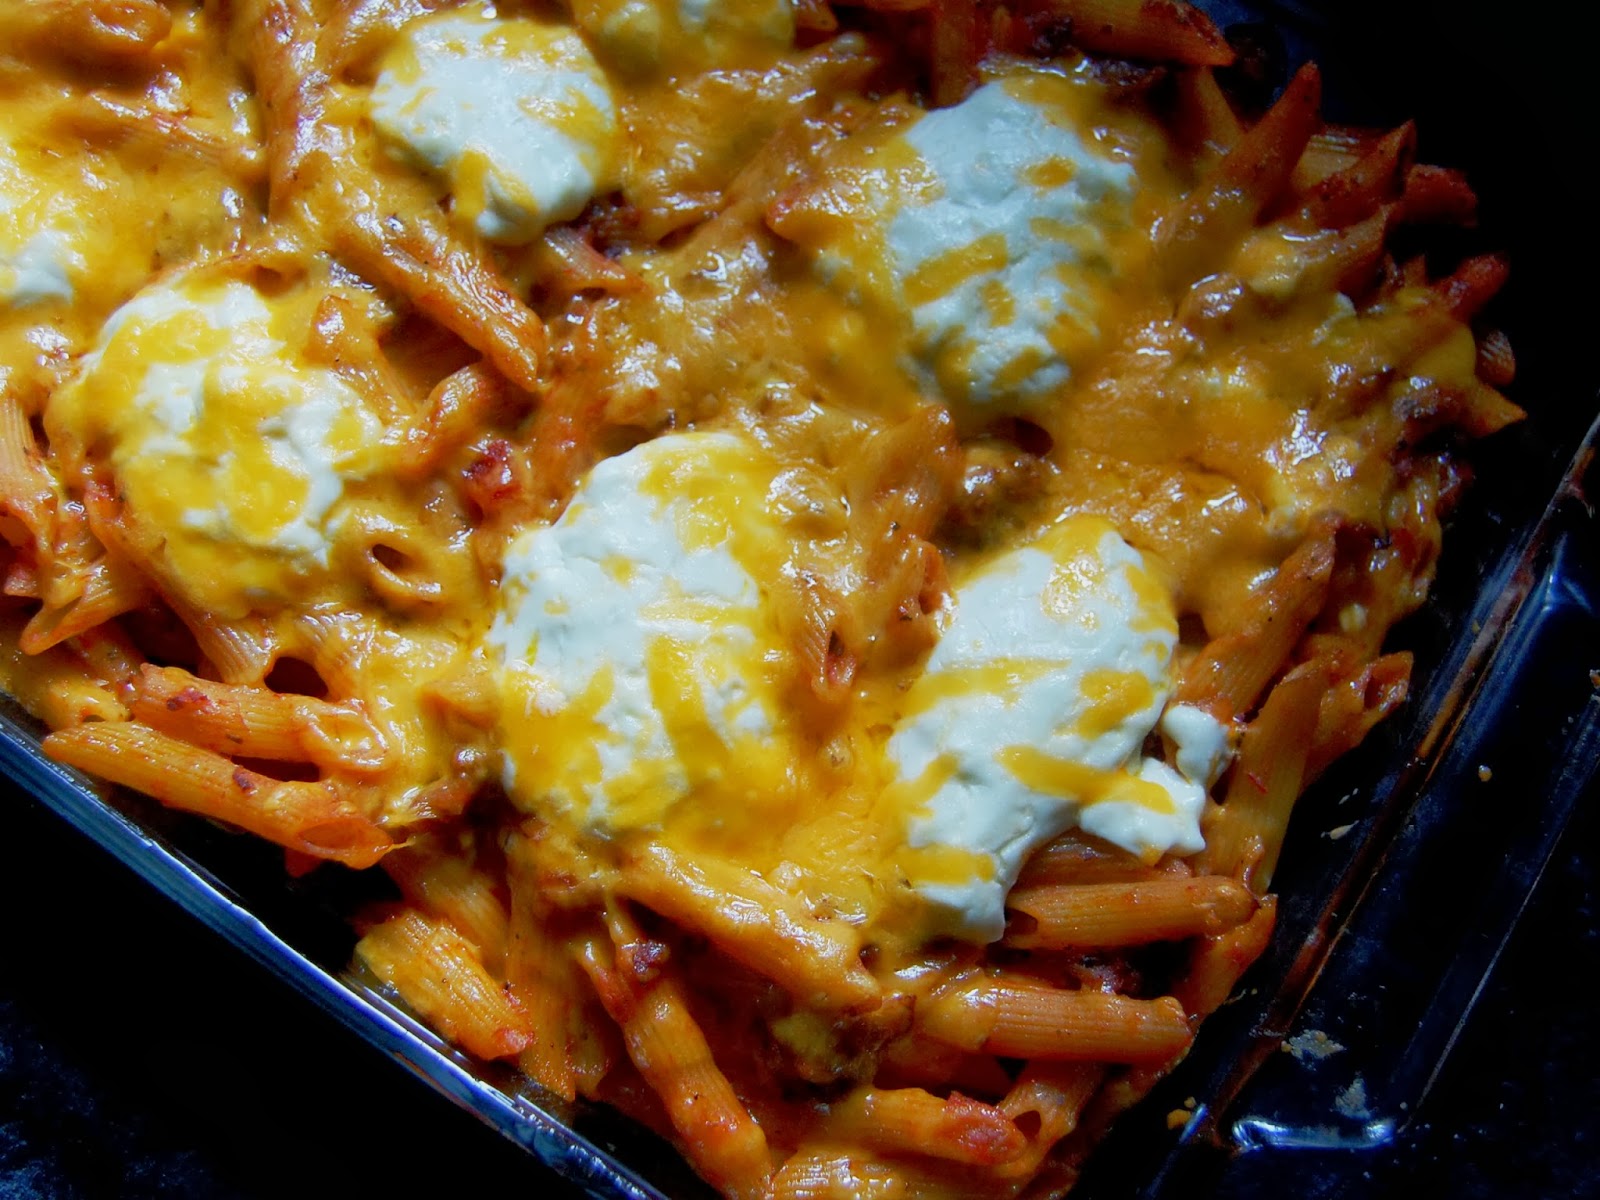 Cheesy Penne Pasta with Sausage